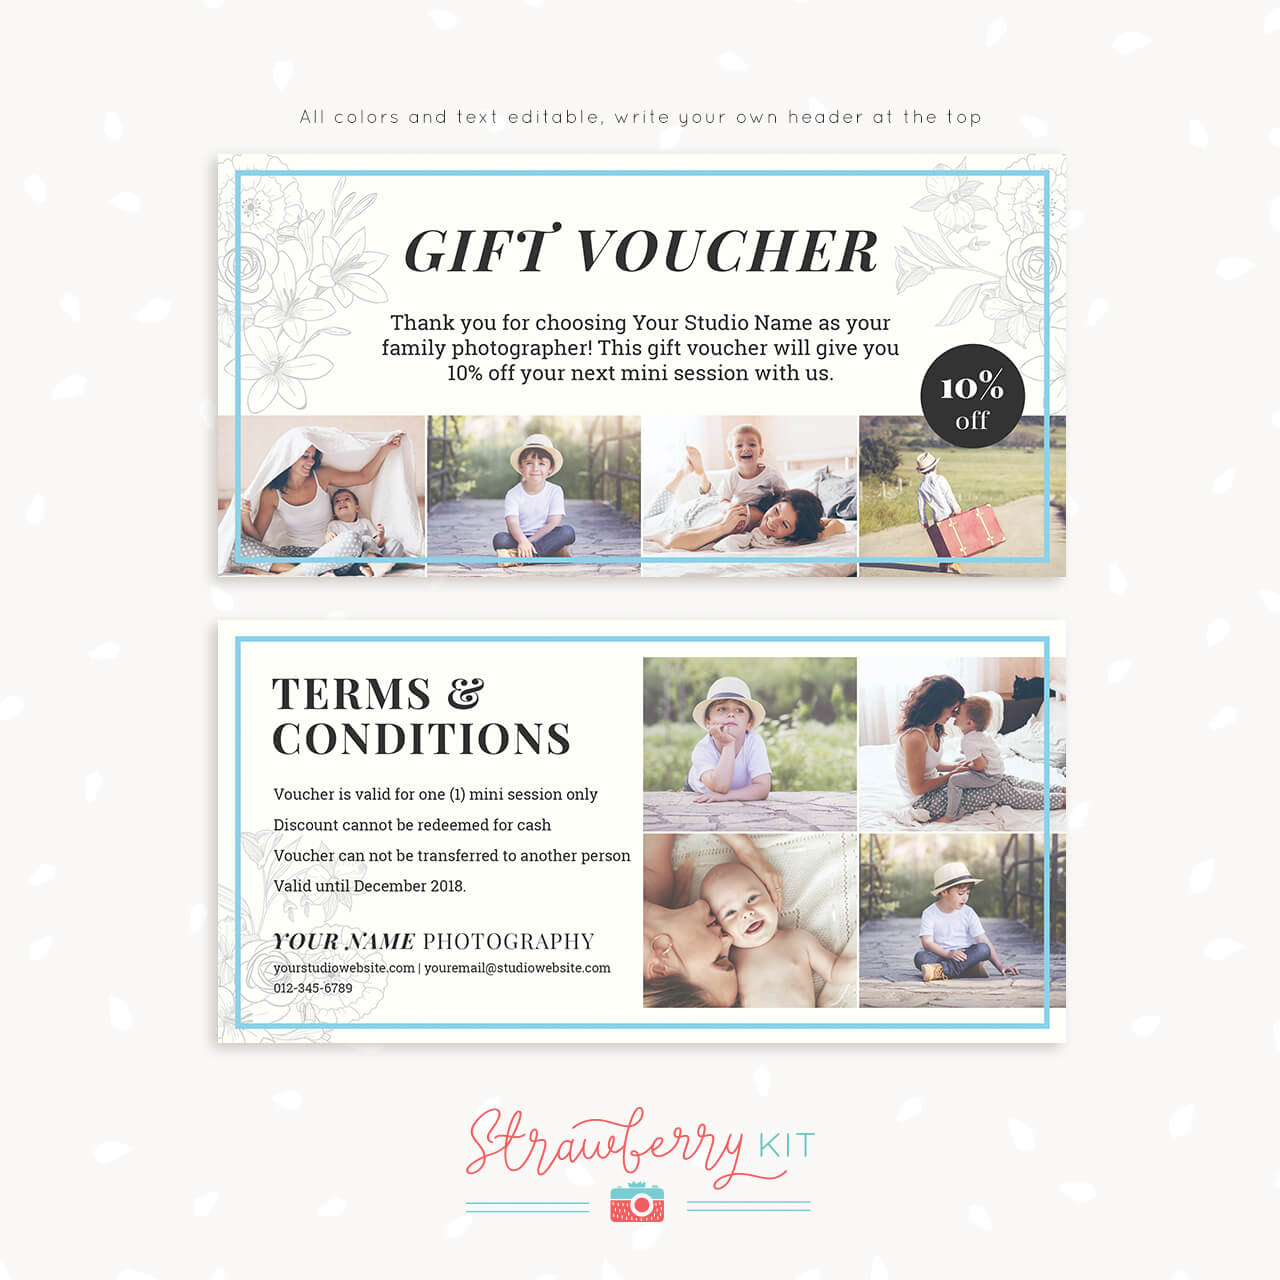 001 Photo Session Gift Certificate Template Fantastic Ideas Intended For Photoshoot Gift Certificate Template